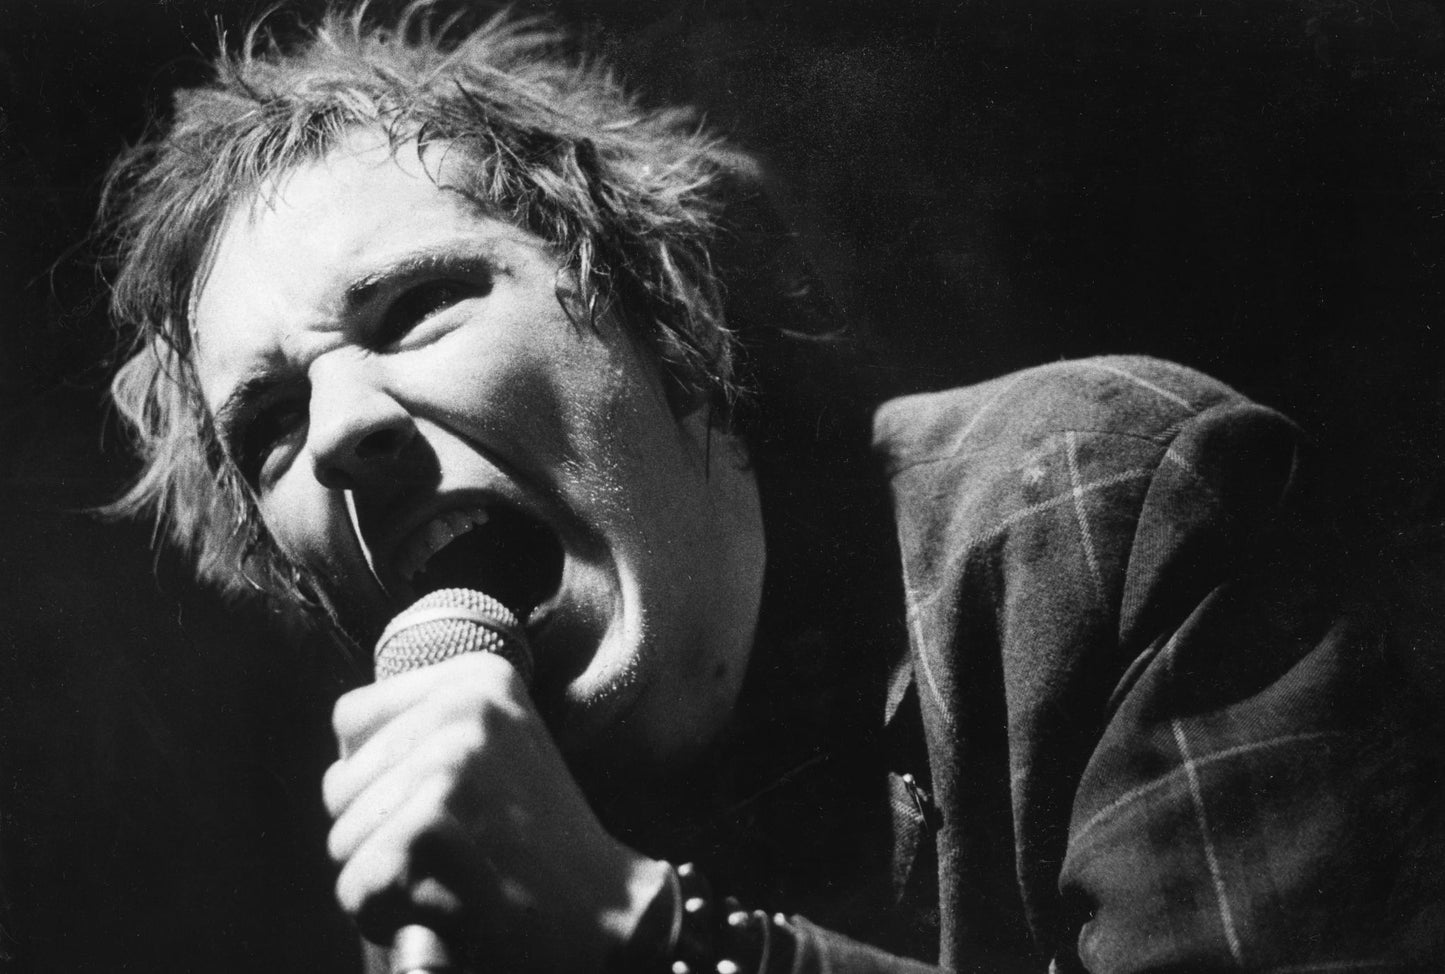 Sex Pistols - Johnny Rotten Screaming On Stage, 1978 Print